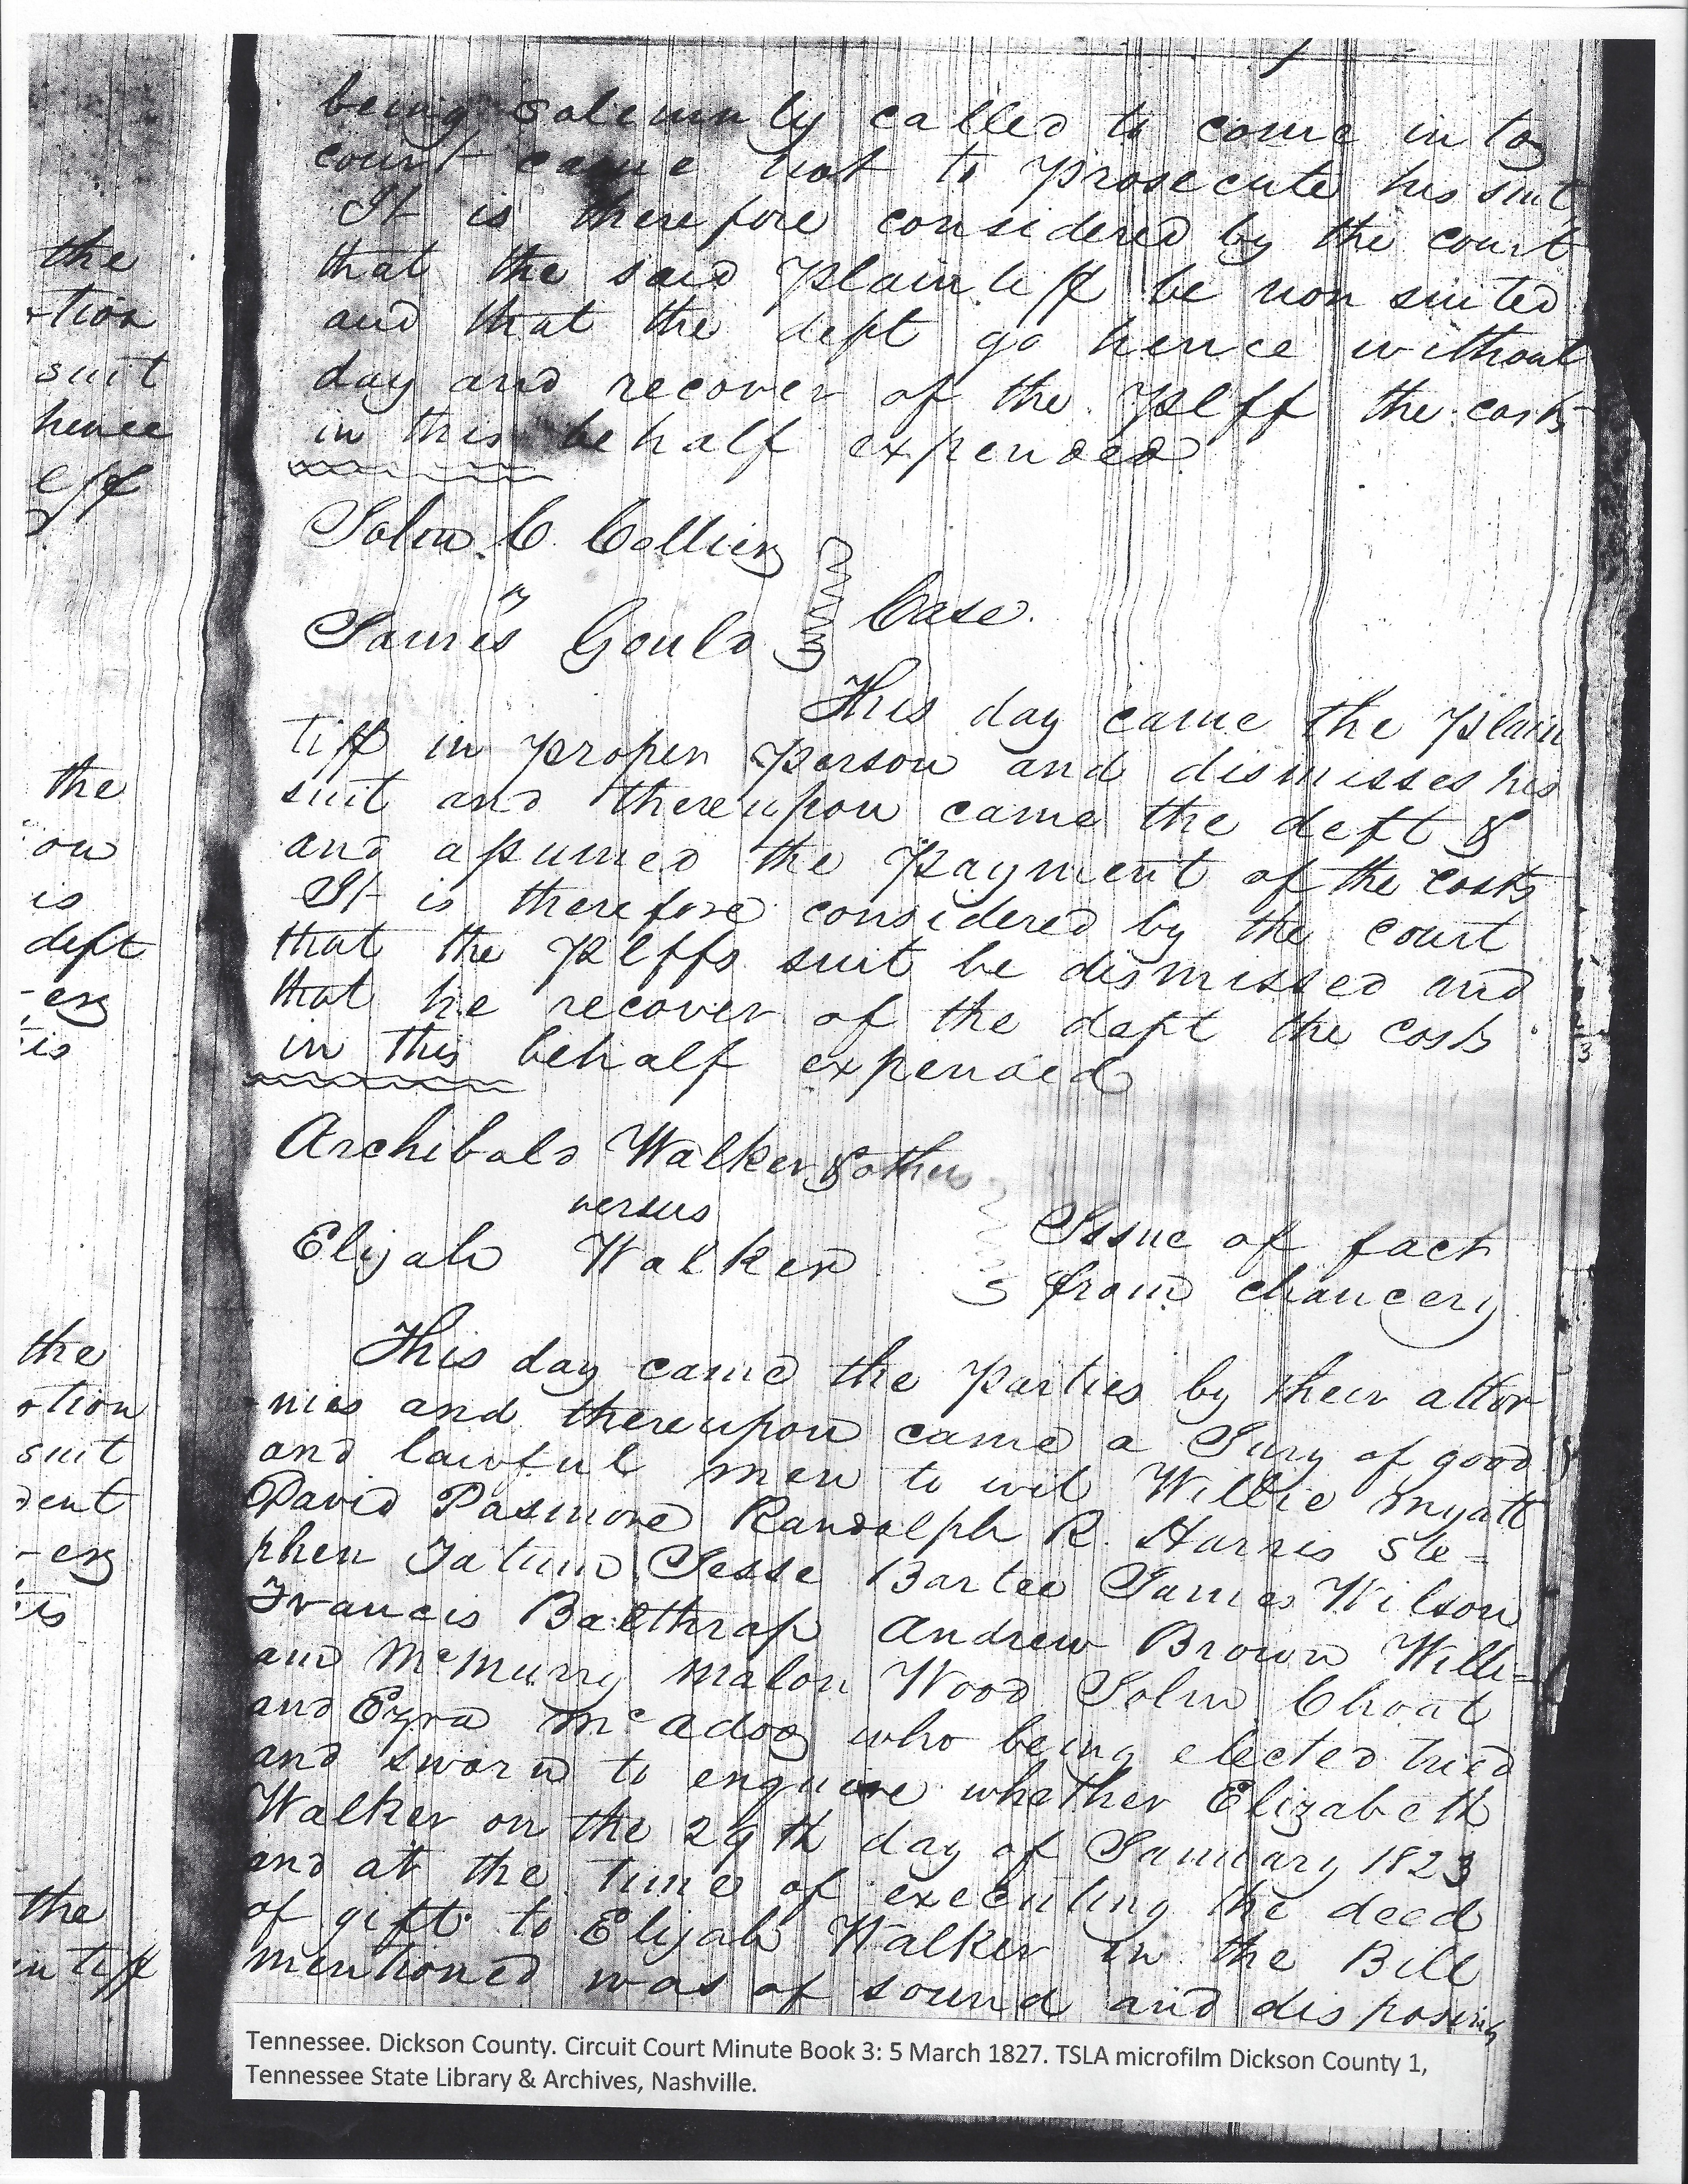 Archalaus Walker, lawsuit 1826, charging that Elizabeth Walker was not in her right mind when she deeded two slaves to Elijah and George H. Walker in 1823